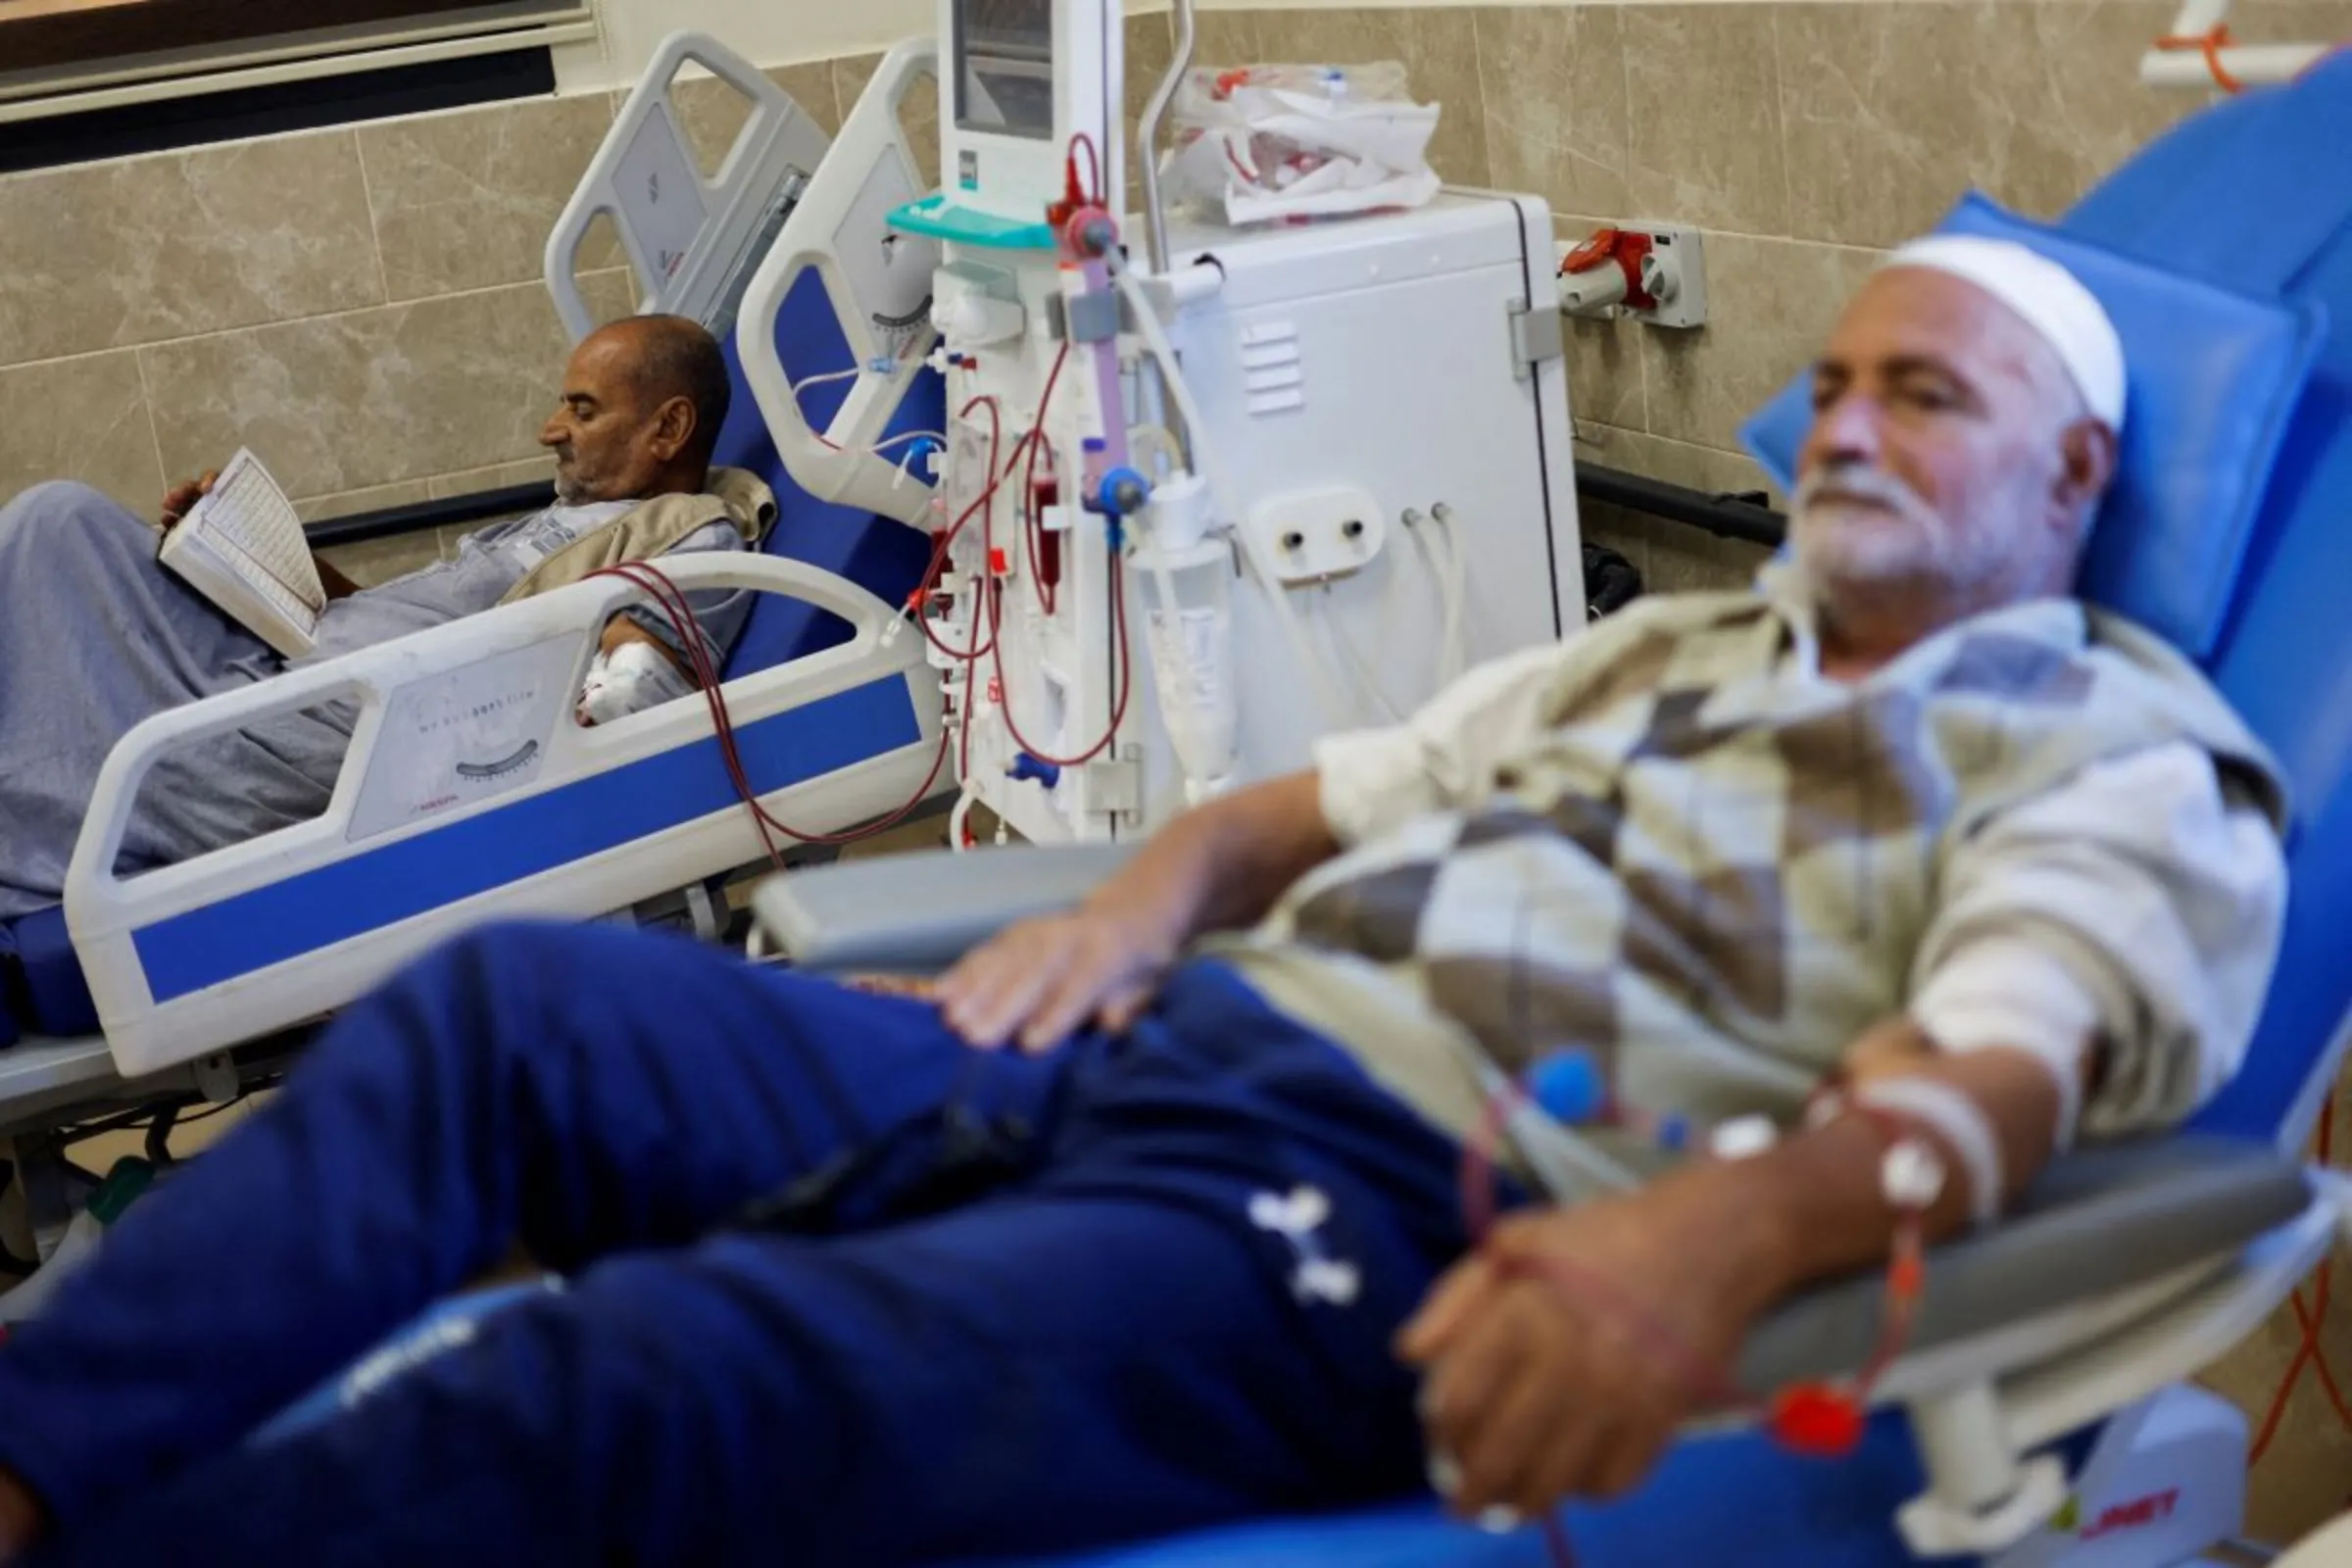 A Palestinian kidney patient reads while lying on a hospital bed, as health officials say they are running out of fuel to operate dialysis devices, amid the ongoing Israeli-Palestinian conflict, at Naser hospital in Khan Younis in the southern Gaza Strip October 15, 2023. REUTERS/Mohammed Salem